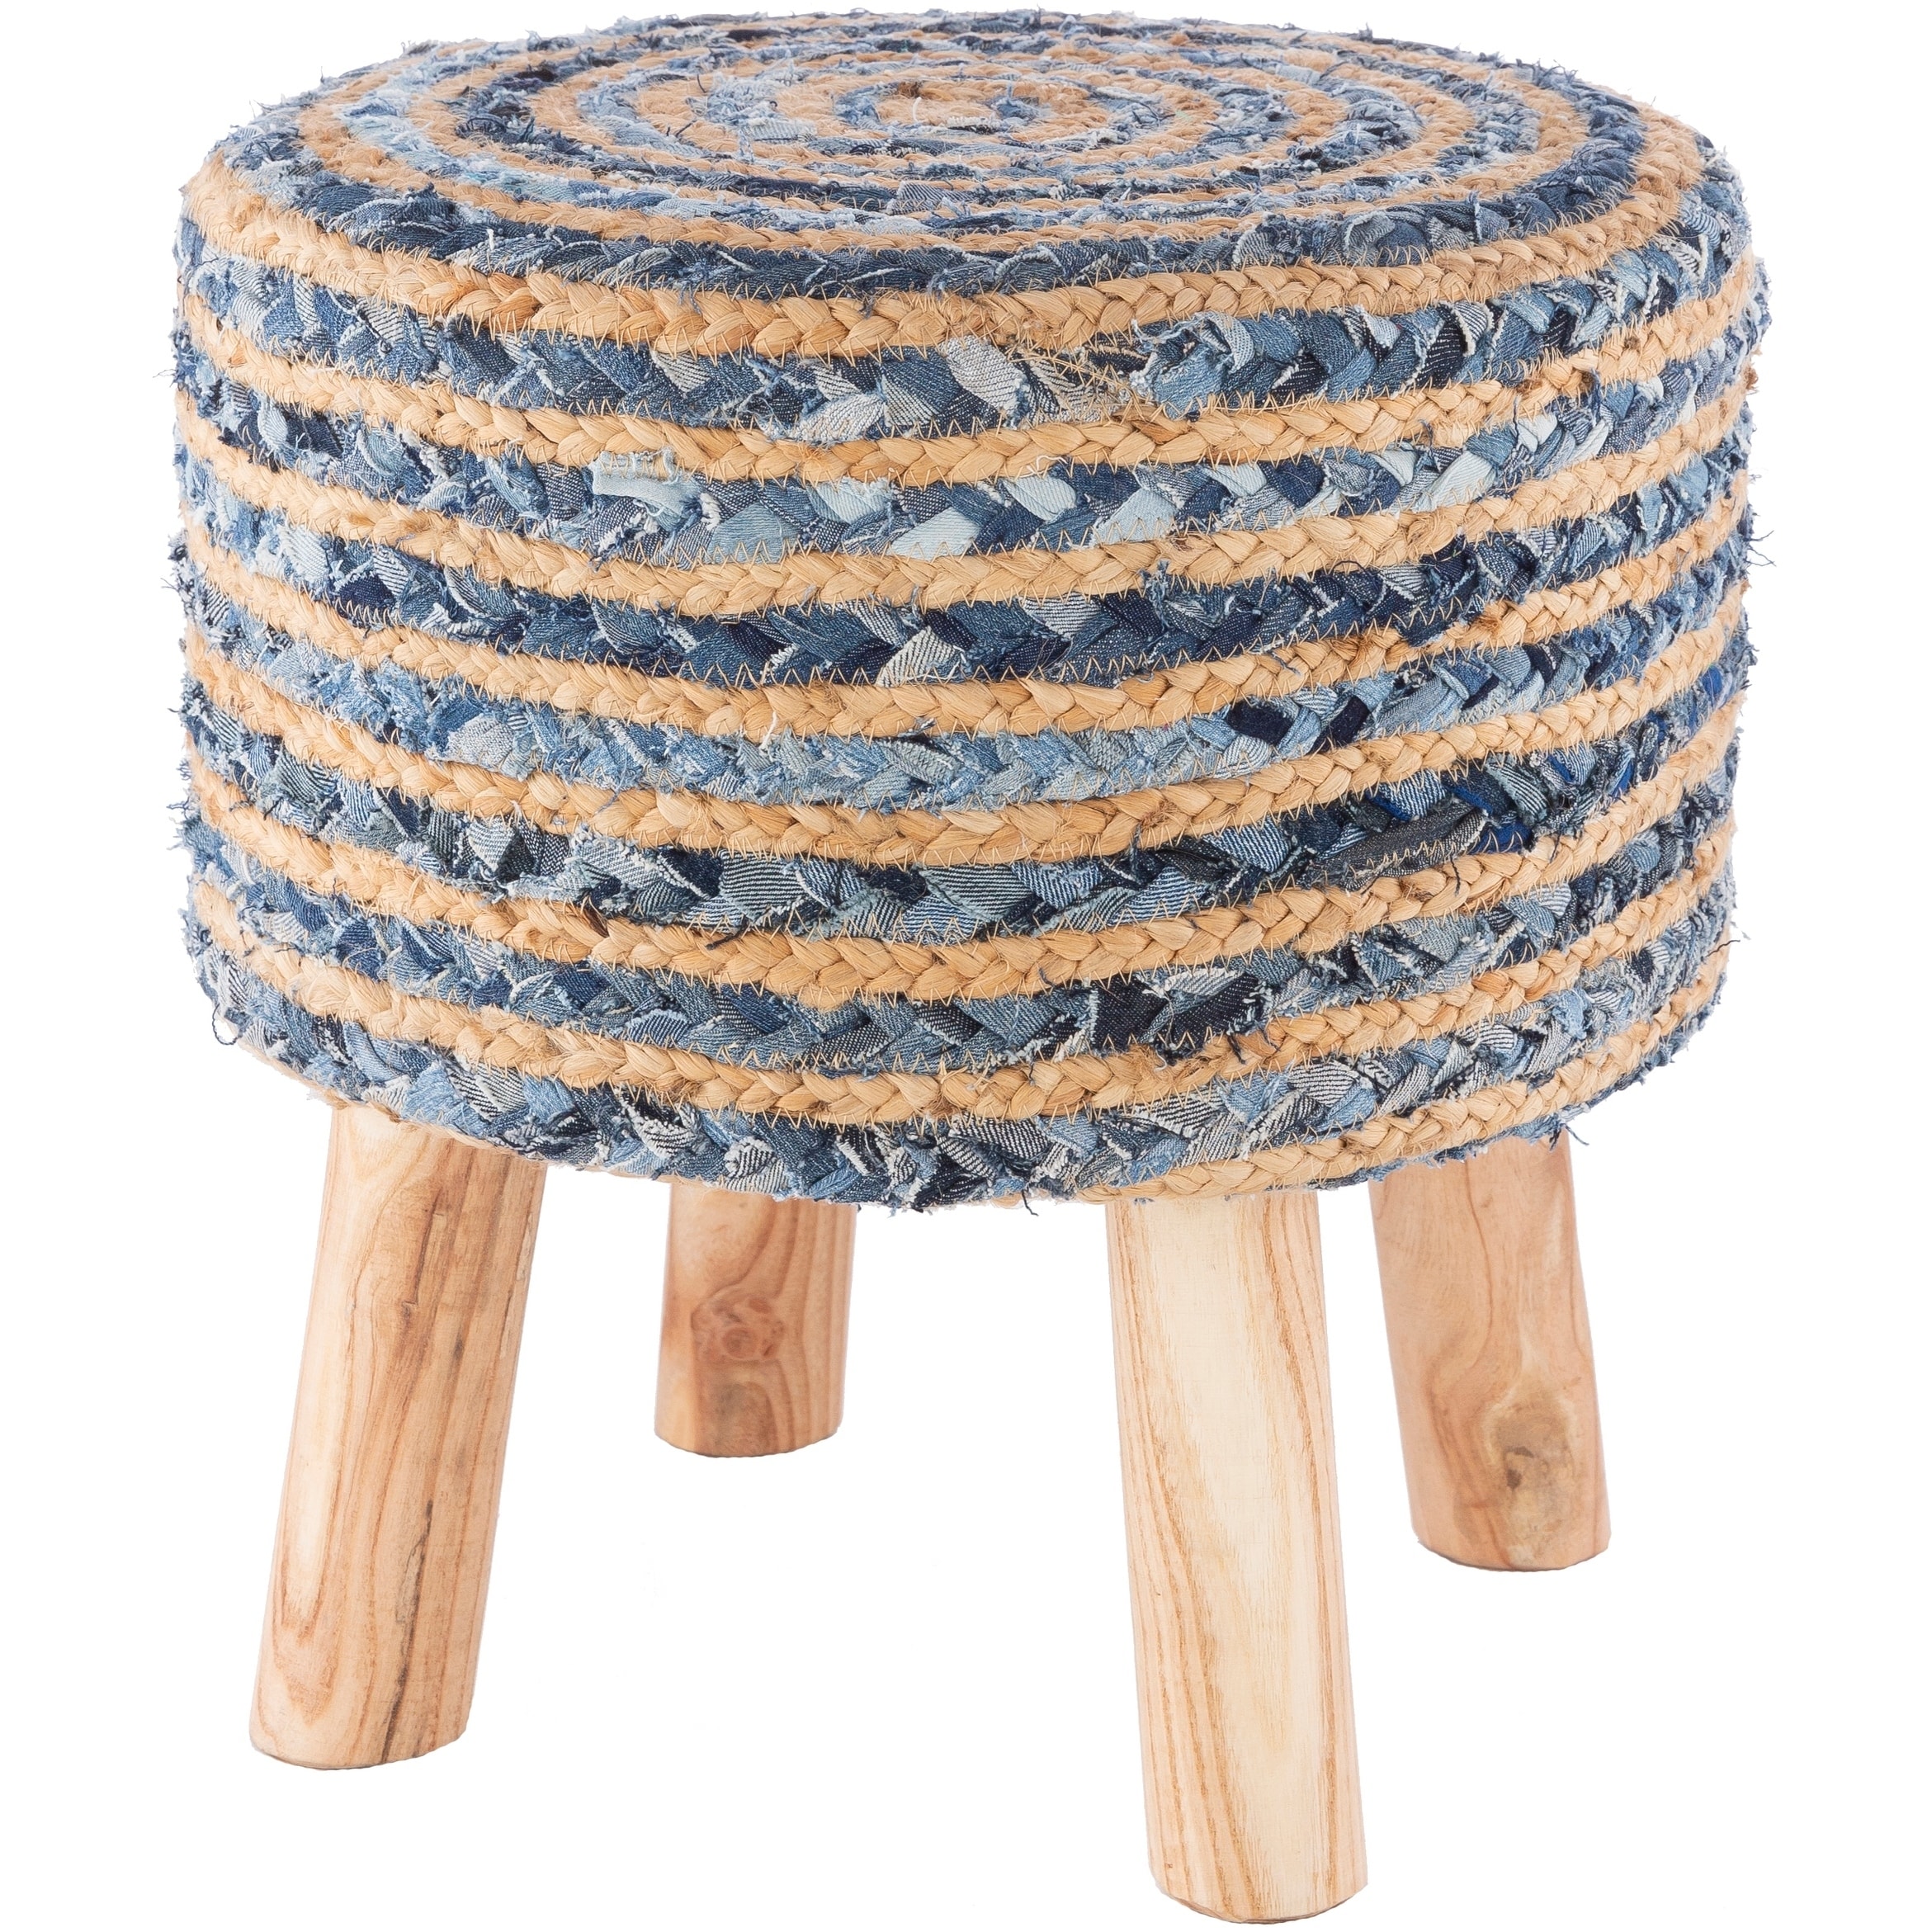 What are the health benefits of using a footstool? – CraftedHomeDecor